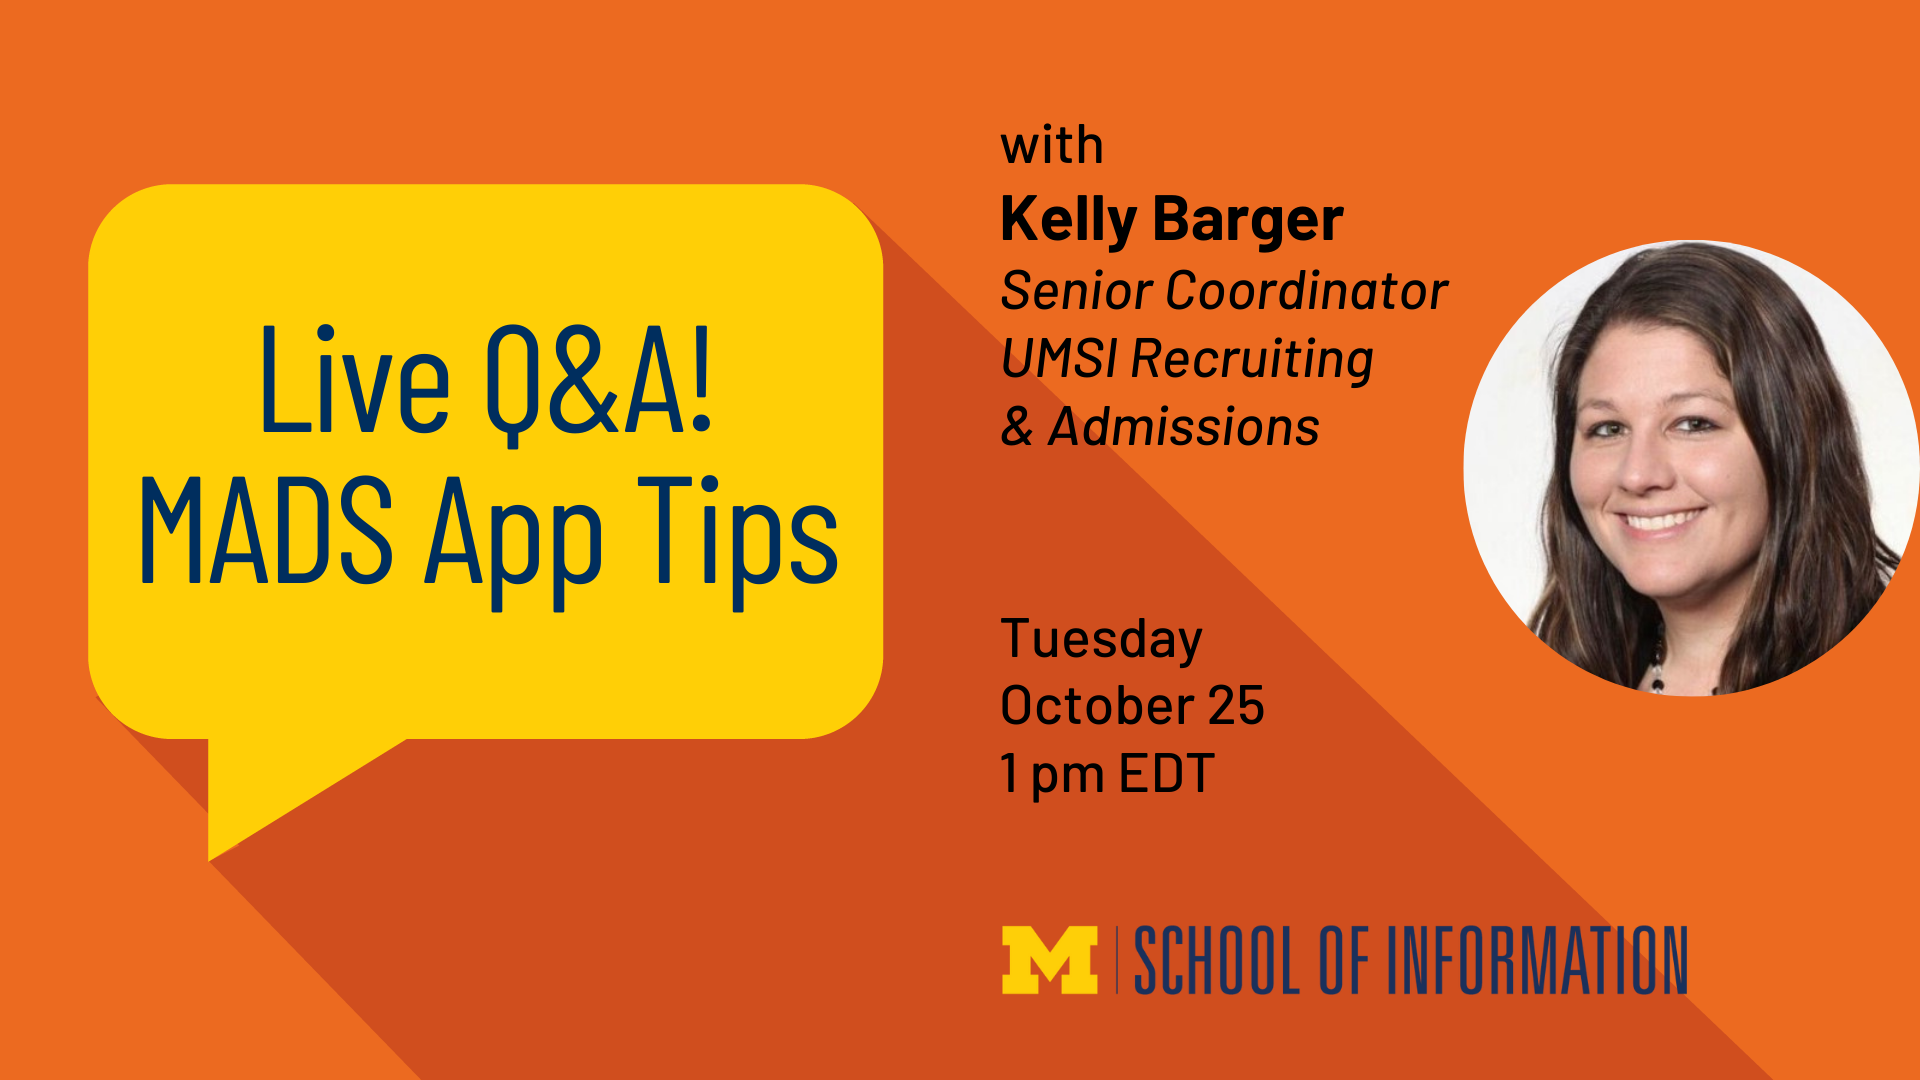 "Live Q&A! MADS App Tips with Kelly Barger, Senior Coordinator, UMSI Recruiting & Admissions. Tuesday, October 25. 1 pm EDT."